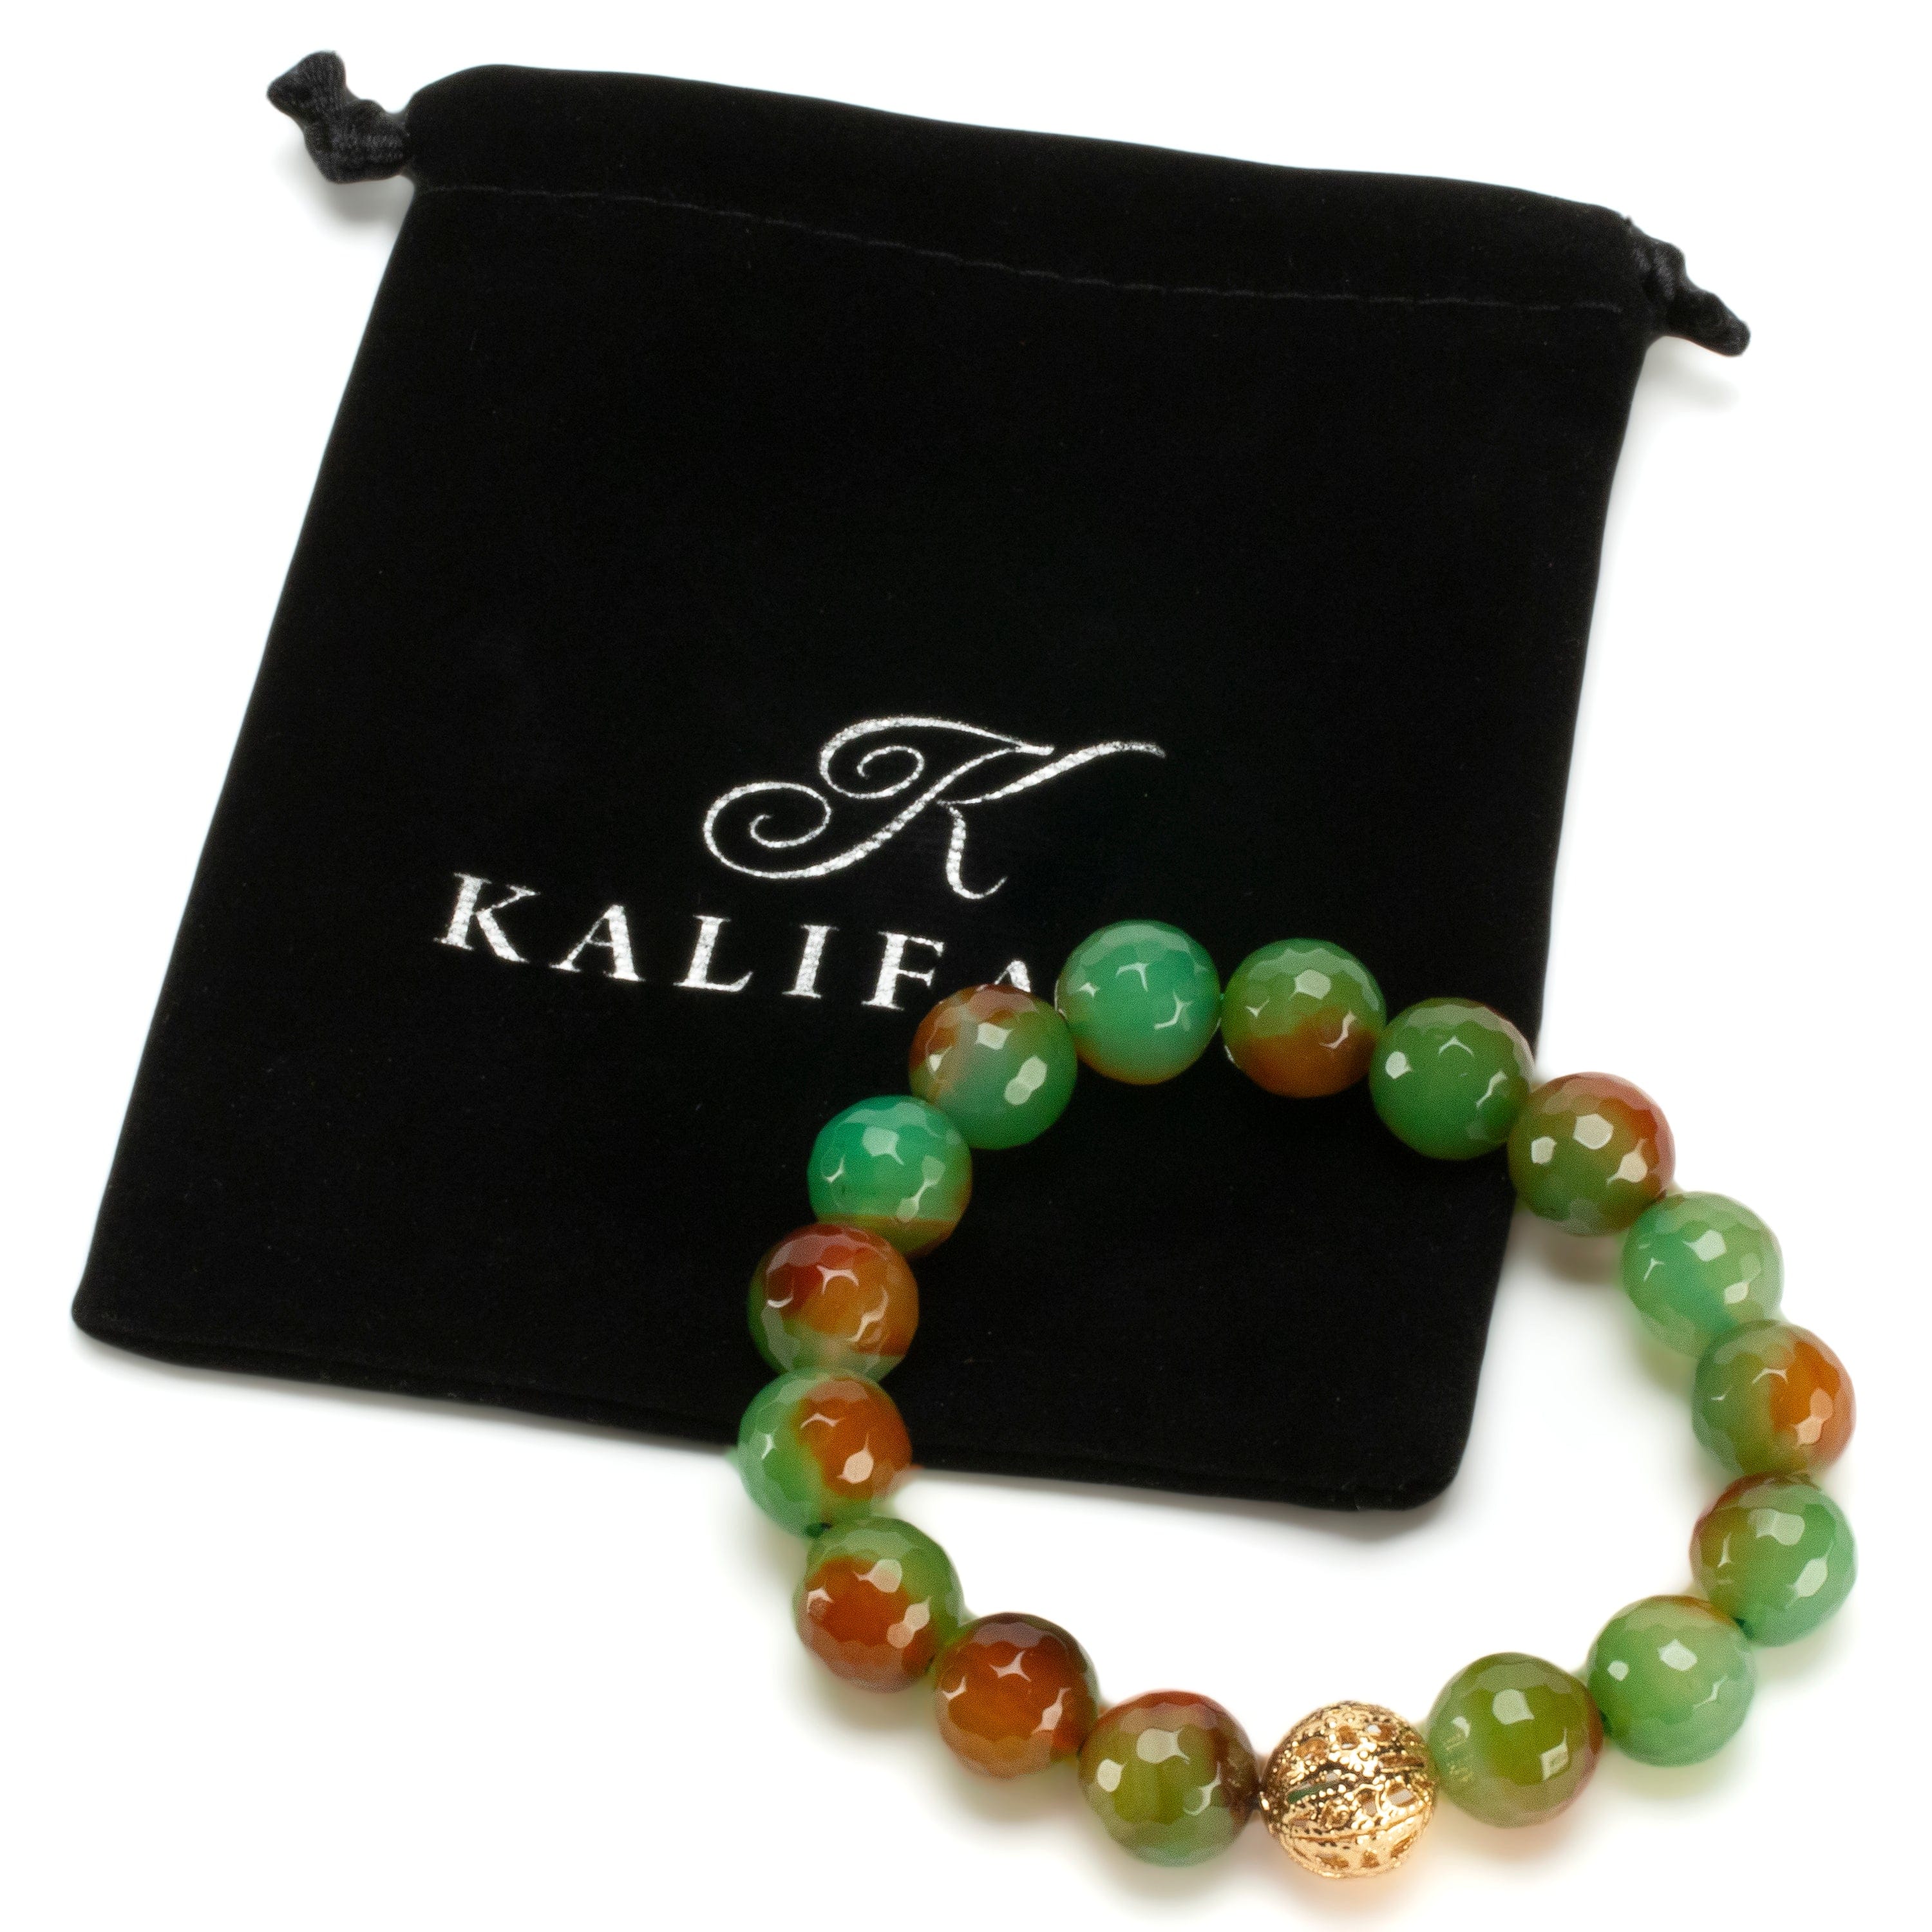 Kalifano Gemstone Bracelets Faceted Agate 12mm Gemstone Bead Elastic Bracelet with Gold Accent Bead GOLD-BGP-078